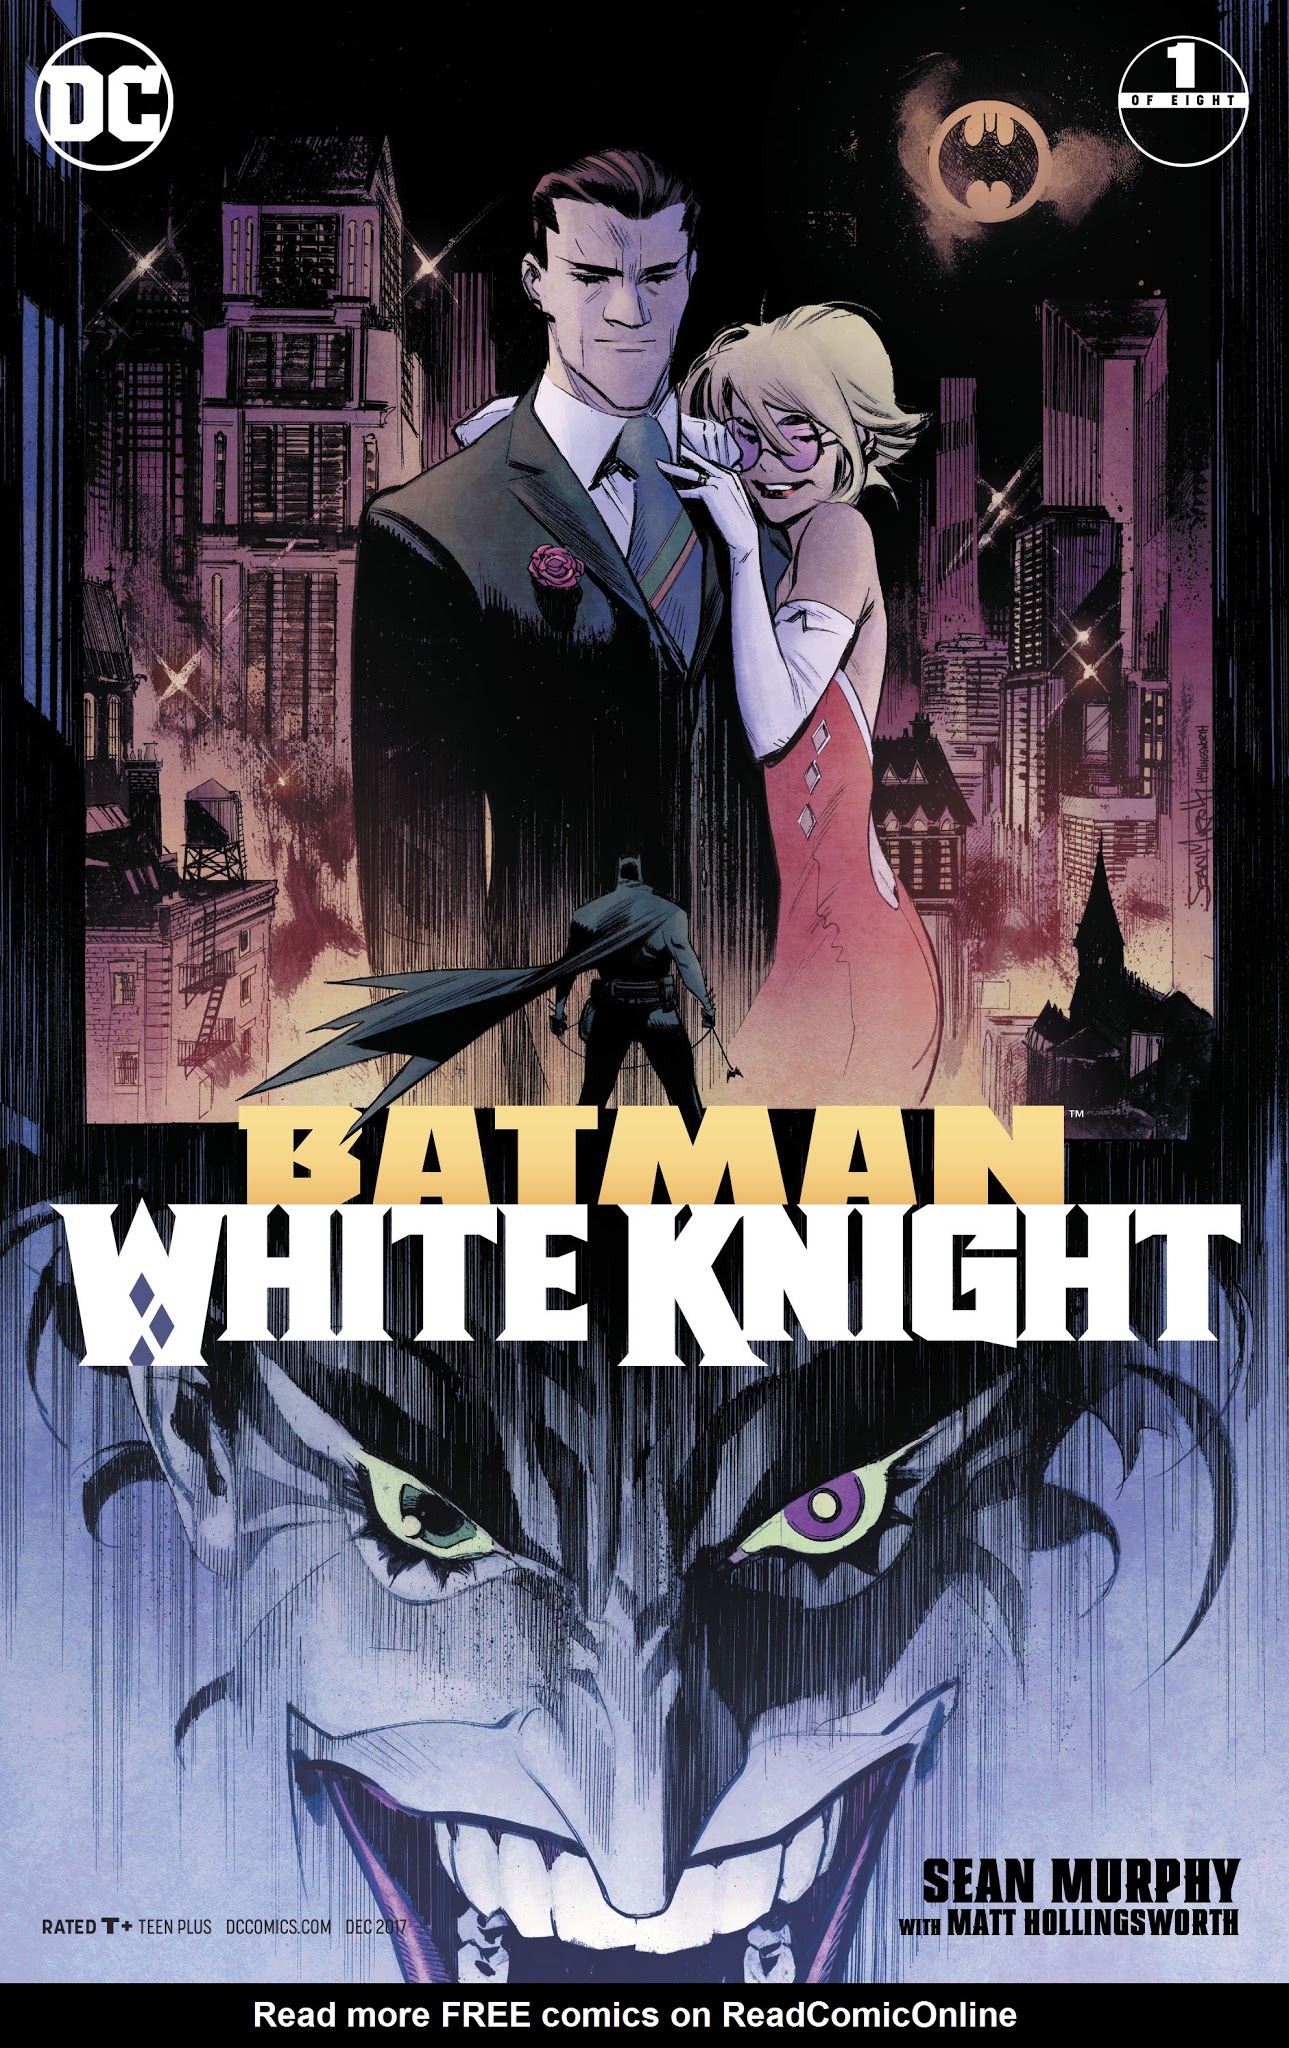 Batman White Knight Issue 1 | Read Batman White Knight Issue 1 comic online  in high quality. Read Full Comic online for free - Read comics online in  high quality .|